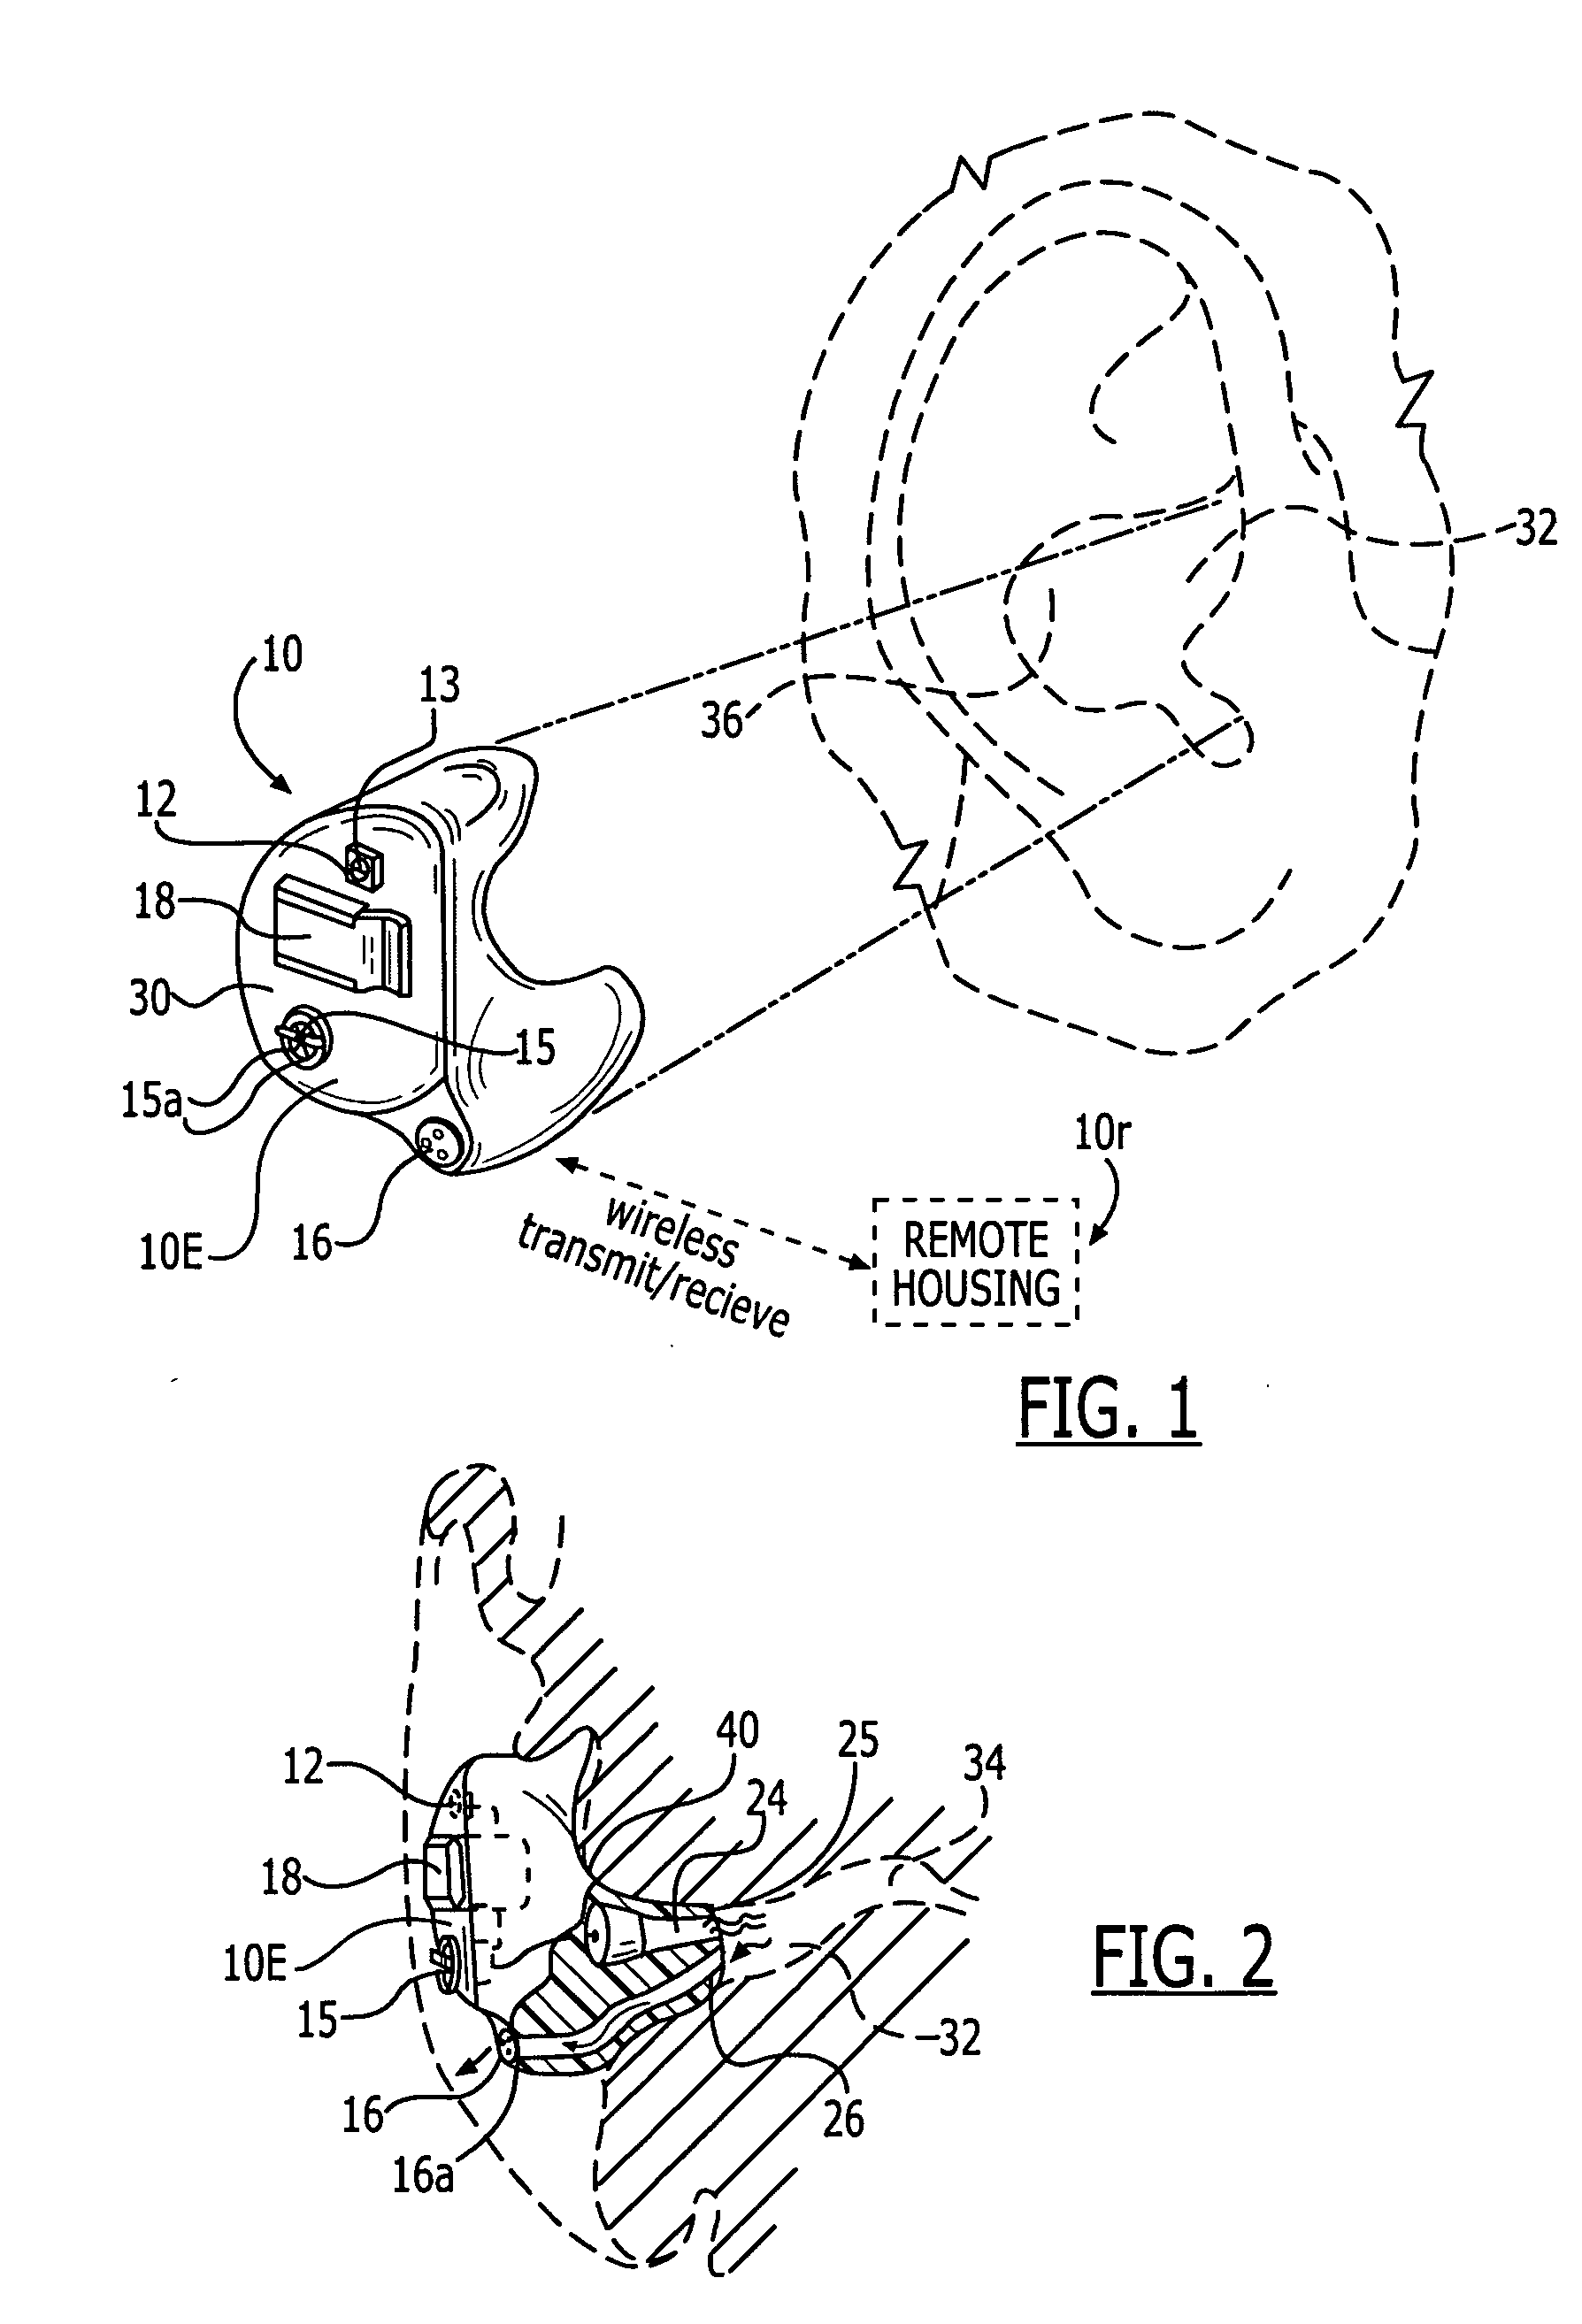 Methods and devices for treating non-stuttering speech-language disorders using delayed auditory feedback